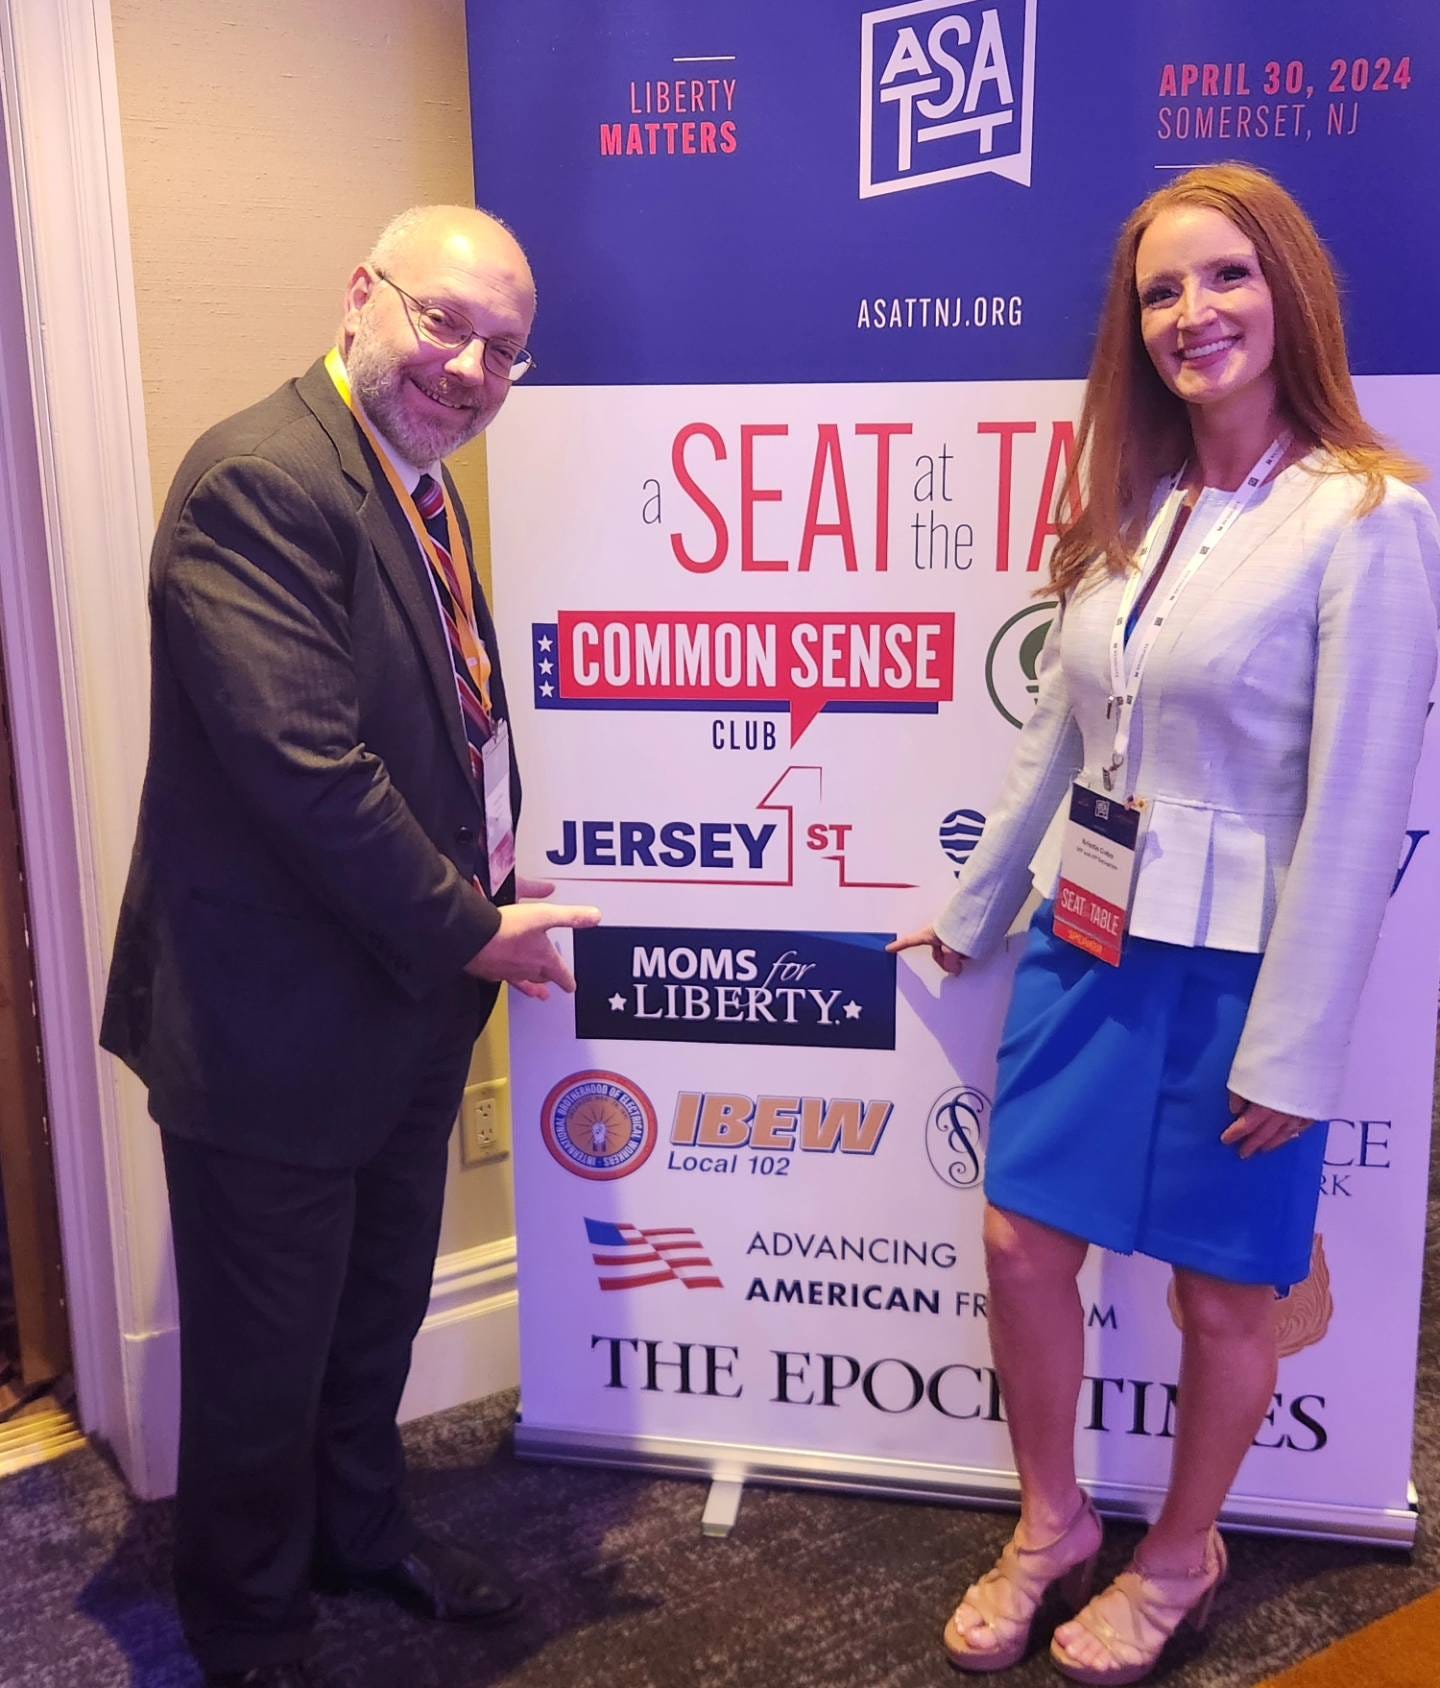 May be an image of 2 people and text that says 'LIBERTY MATTERS APRIL30, 2024 30, SOMERSET, NJ ASA ASATTNJ.ORG ORG a SEAT ạt the TA COMMON COMMONSENSE SENSE CLUB JERSEYT_ JERSEY MOMS for LIBERTY Local Local102 IBEW 102 ADVANCING AMERICAN FR THE EPOCI ΓΙ ES'